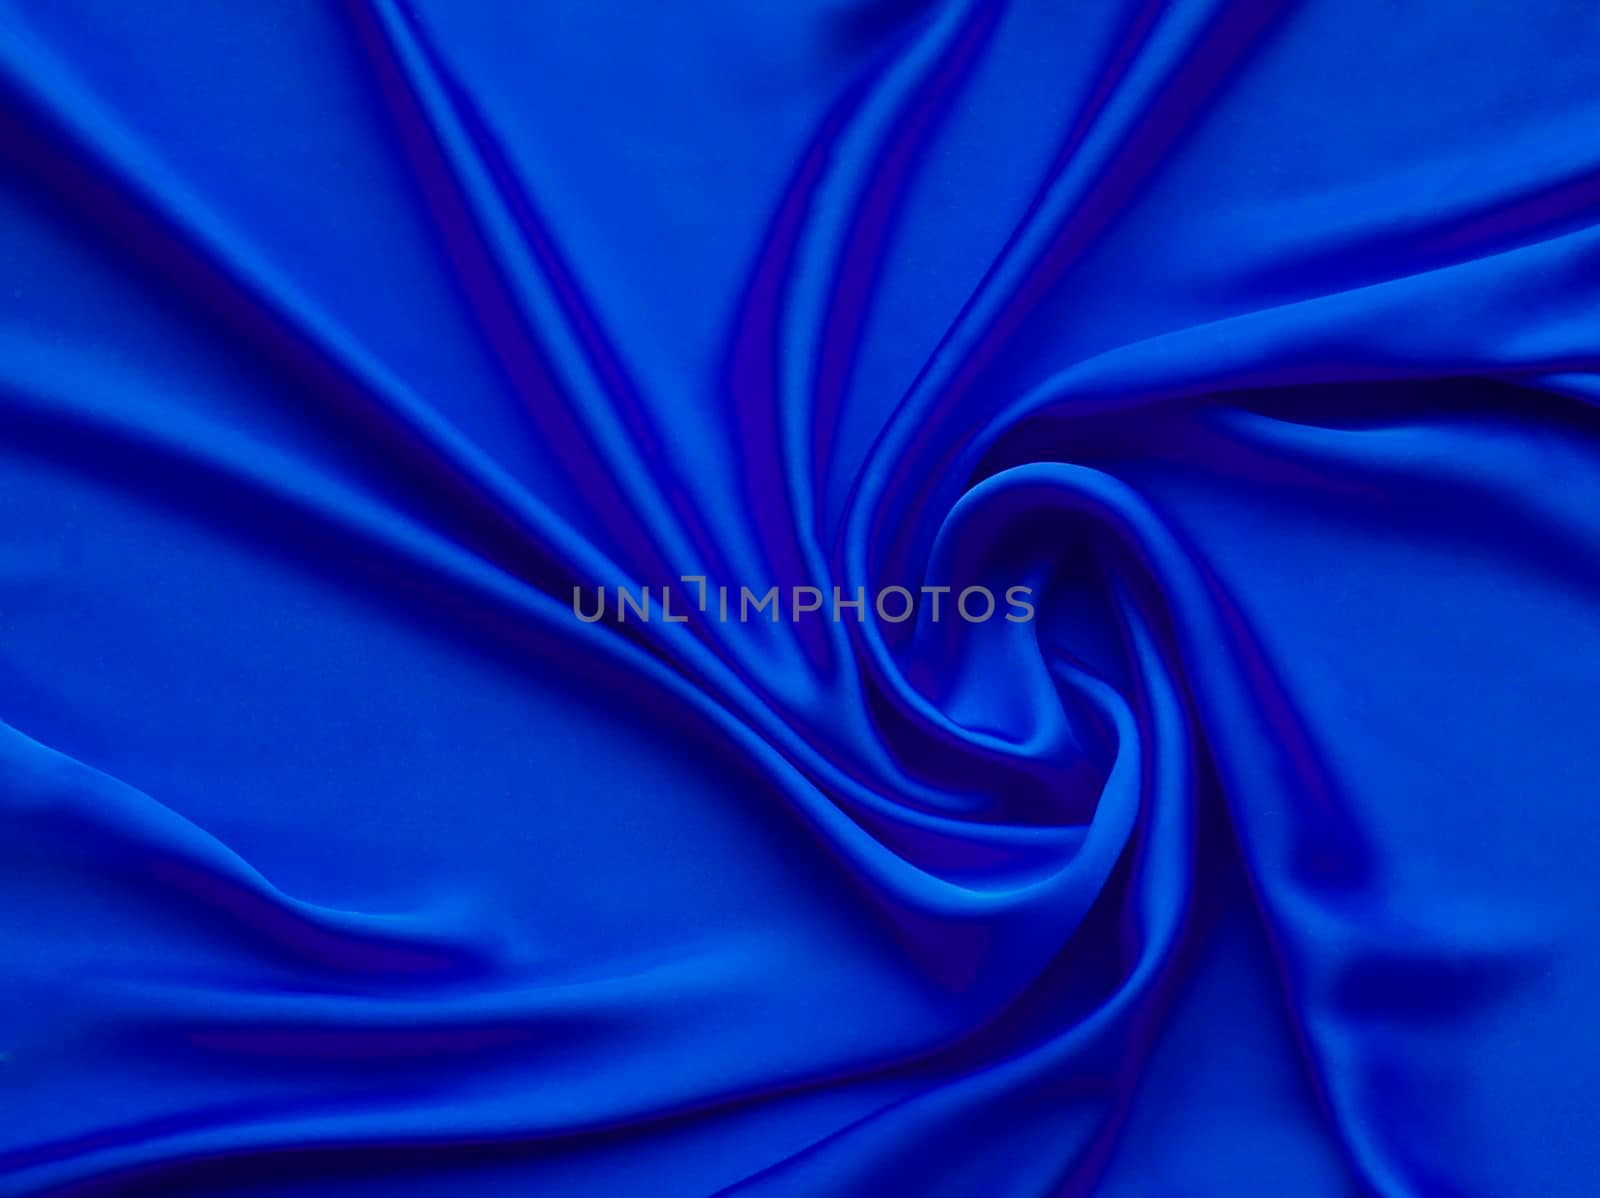 luxurious blue satin background close up for postcard or abstracted wallpaper